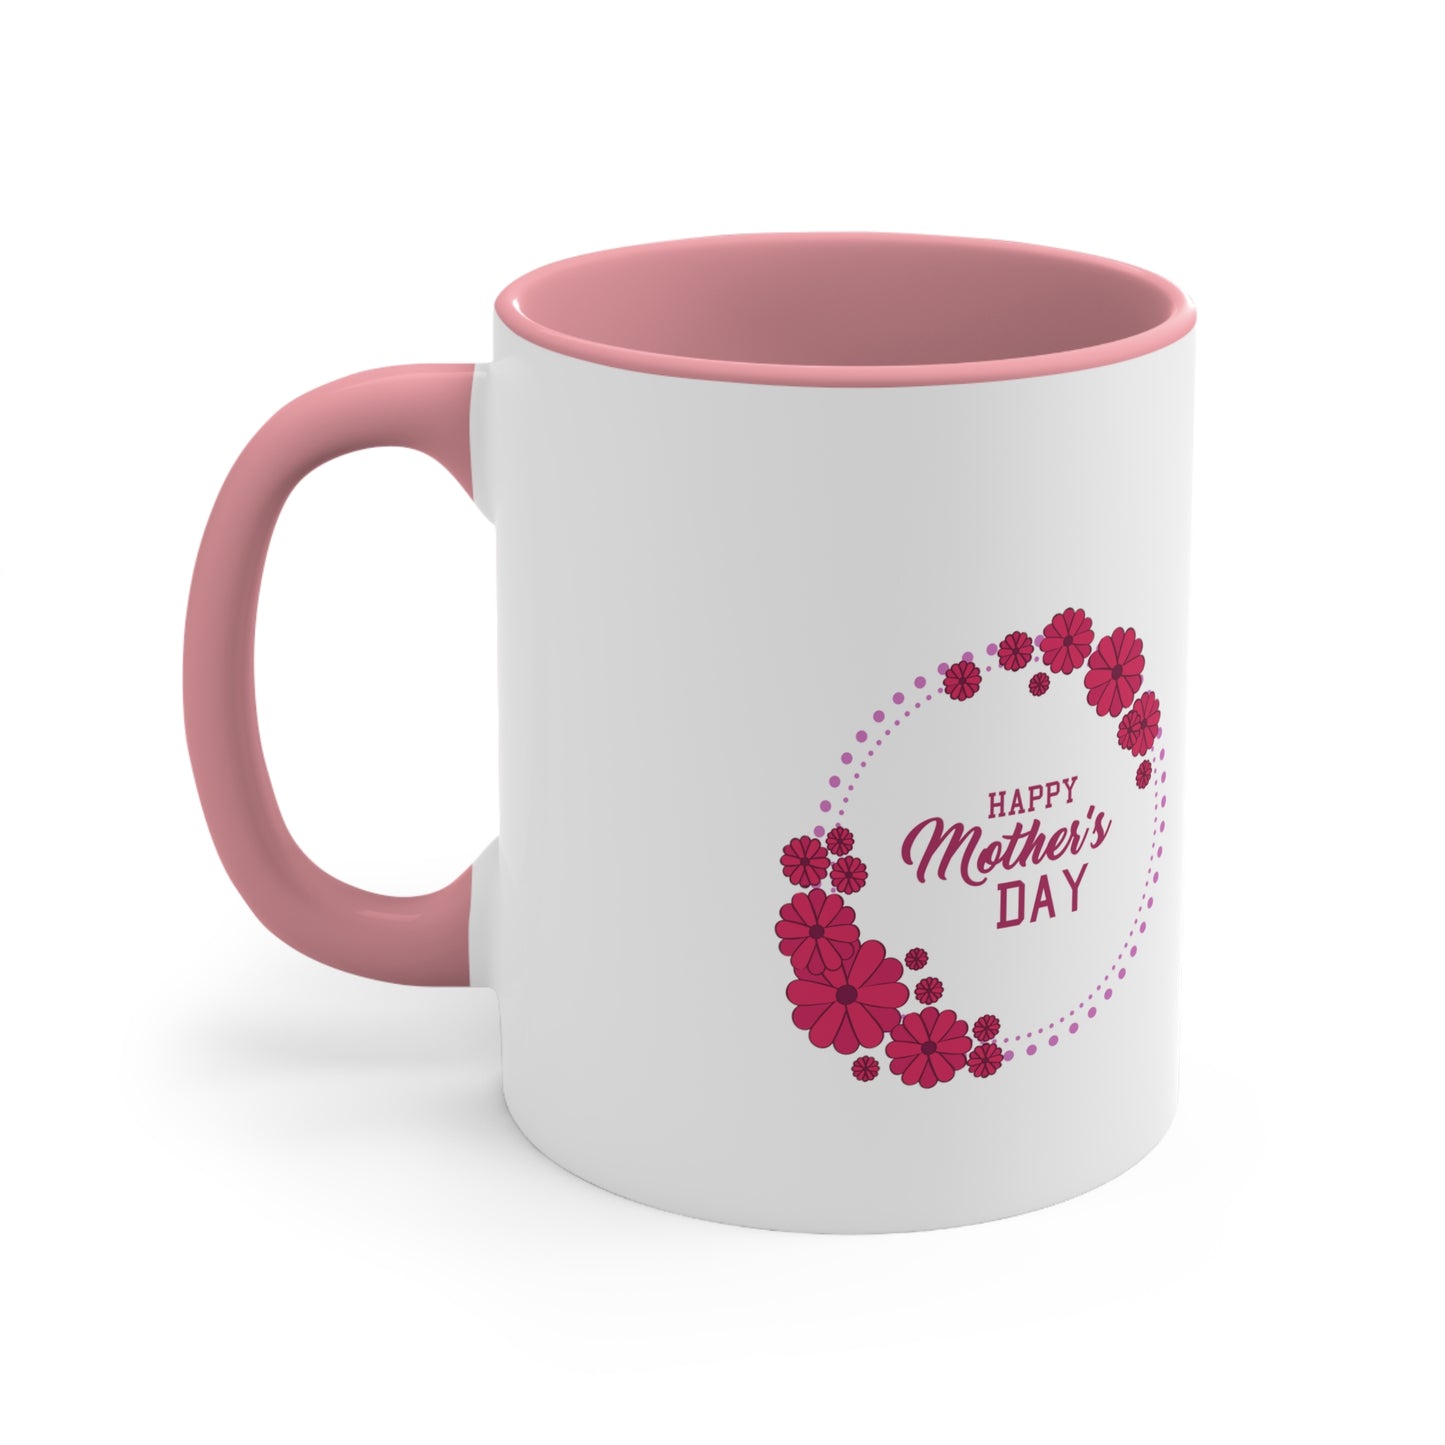 Mother's Day Coffee Mug, Perfect Mother's Day Gift, Mother's Day Floral Coffee Mug, Essential Mother's Day Coffee Cup, Cheerful Mother's Day Mug, timental Mother's Day Cup, Stylish Mom Gift